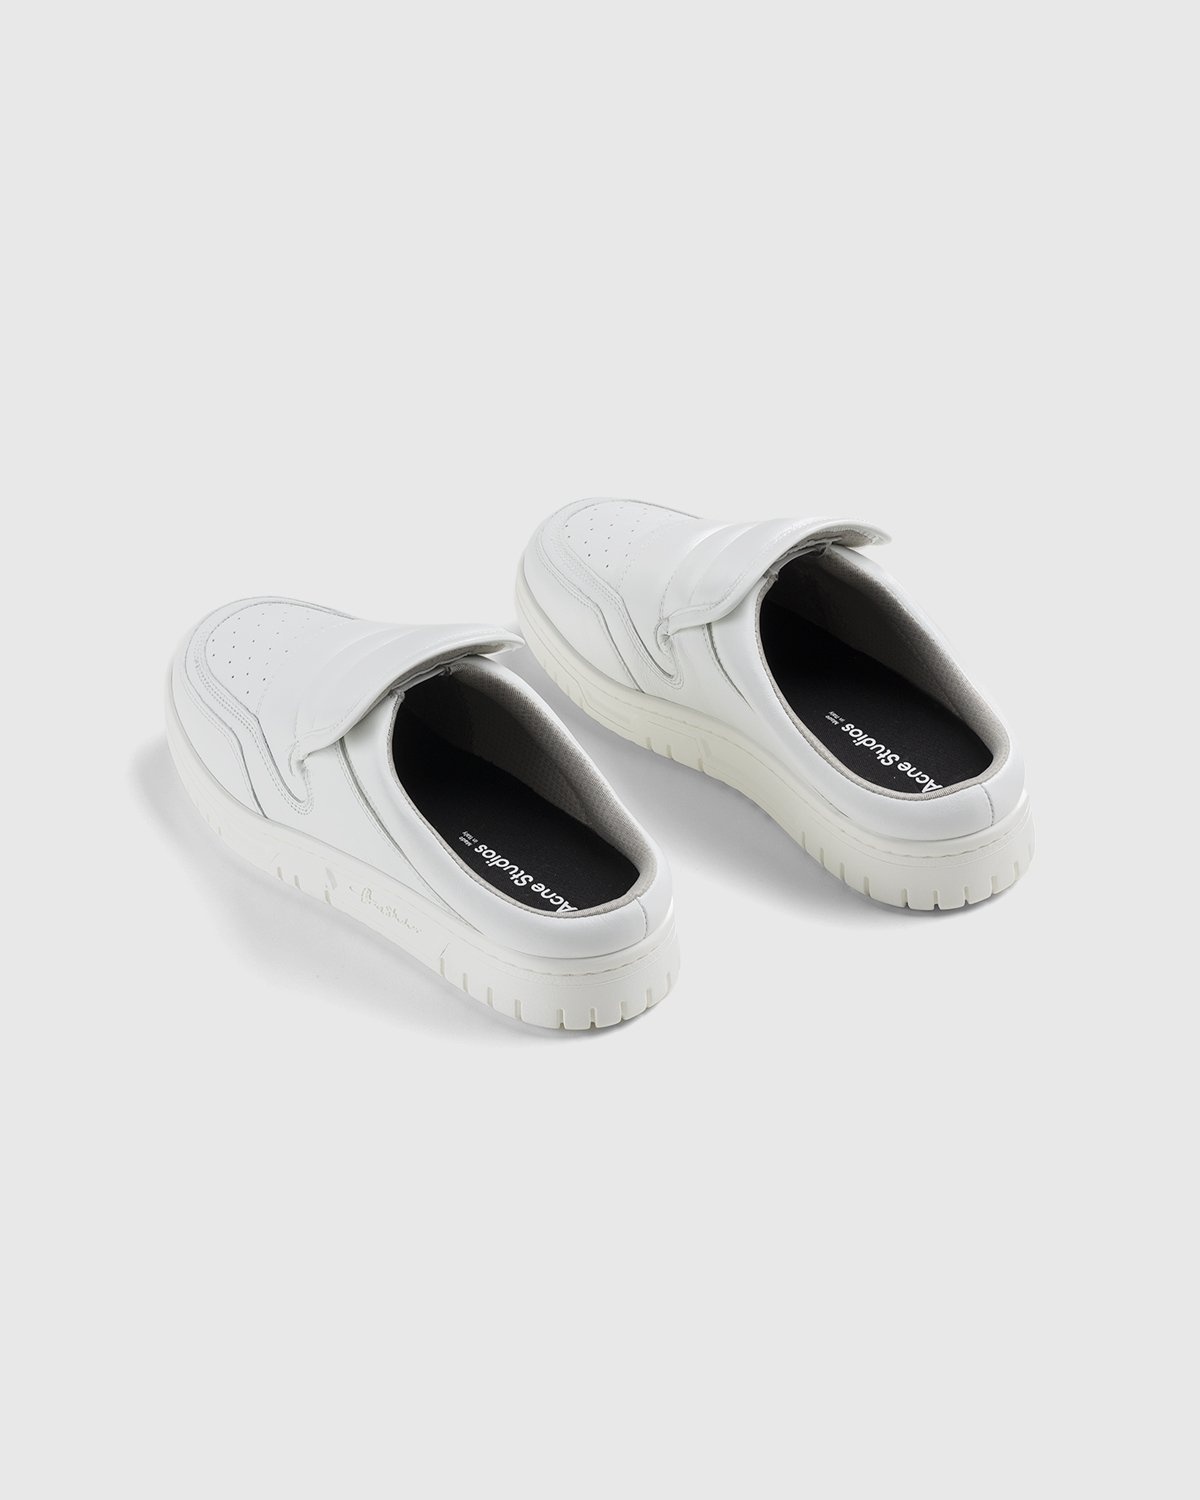 Acne Studios – Cow Leather Mule White - Sneakers - White - Image 4